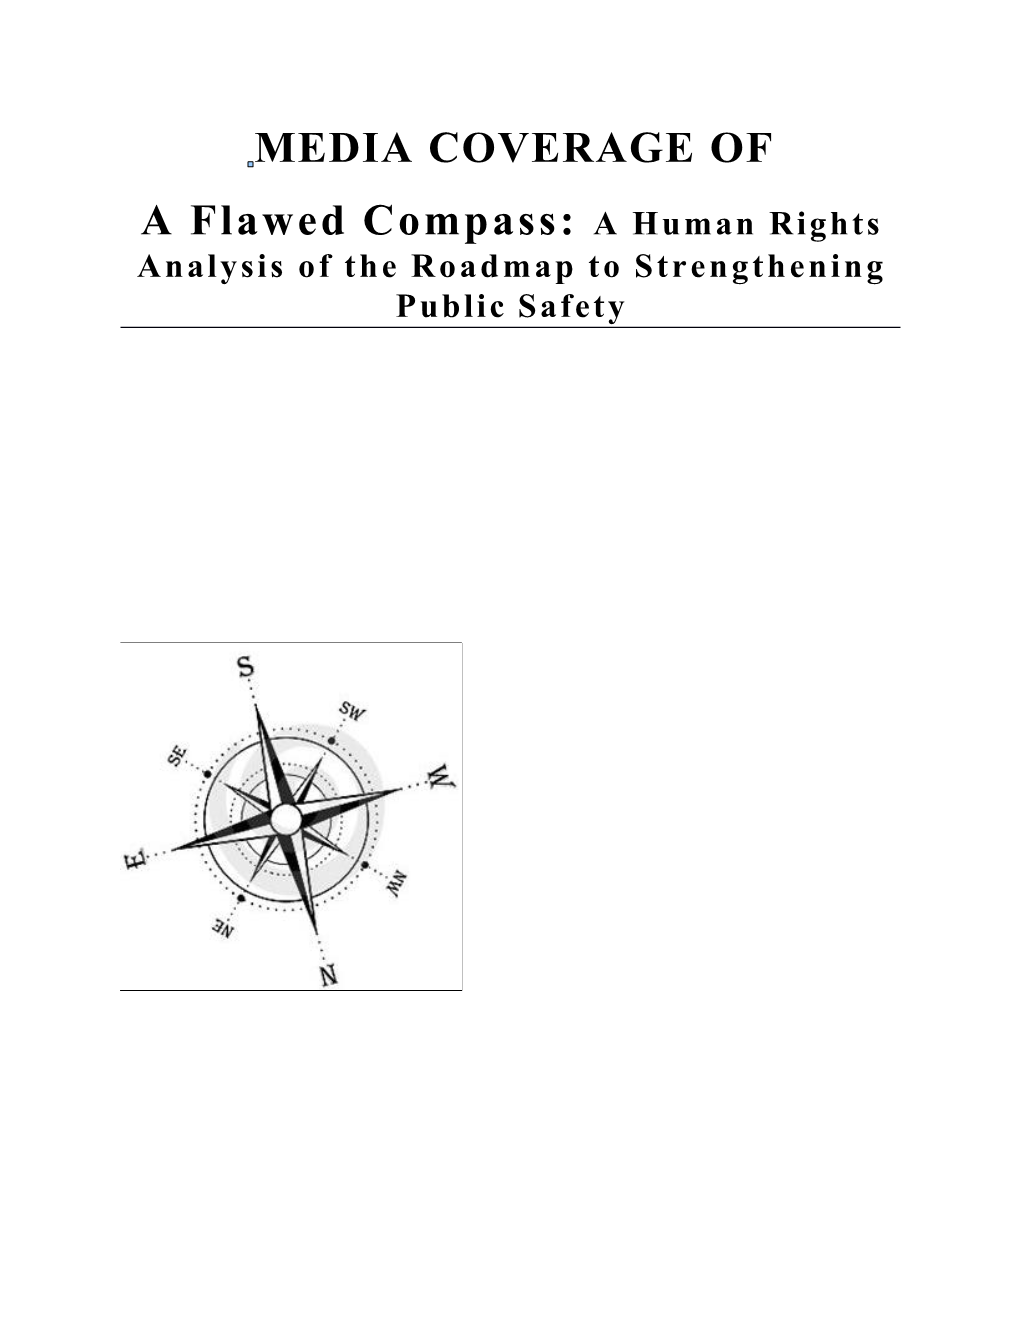 MEDIA COVERAGE of Flawed Compass Revised